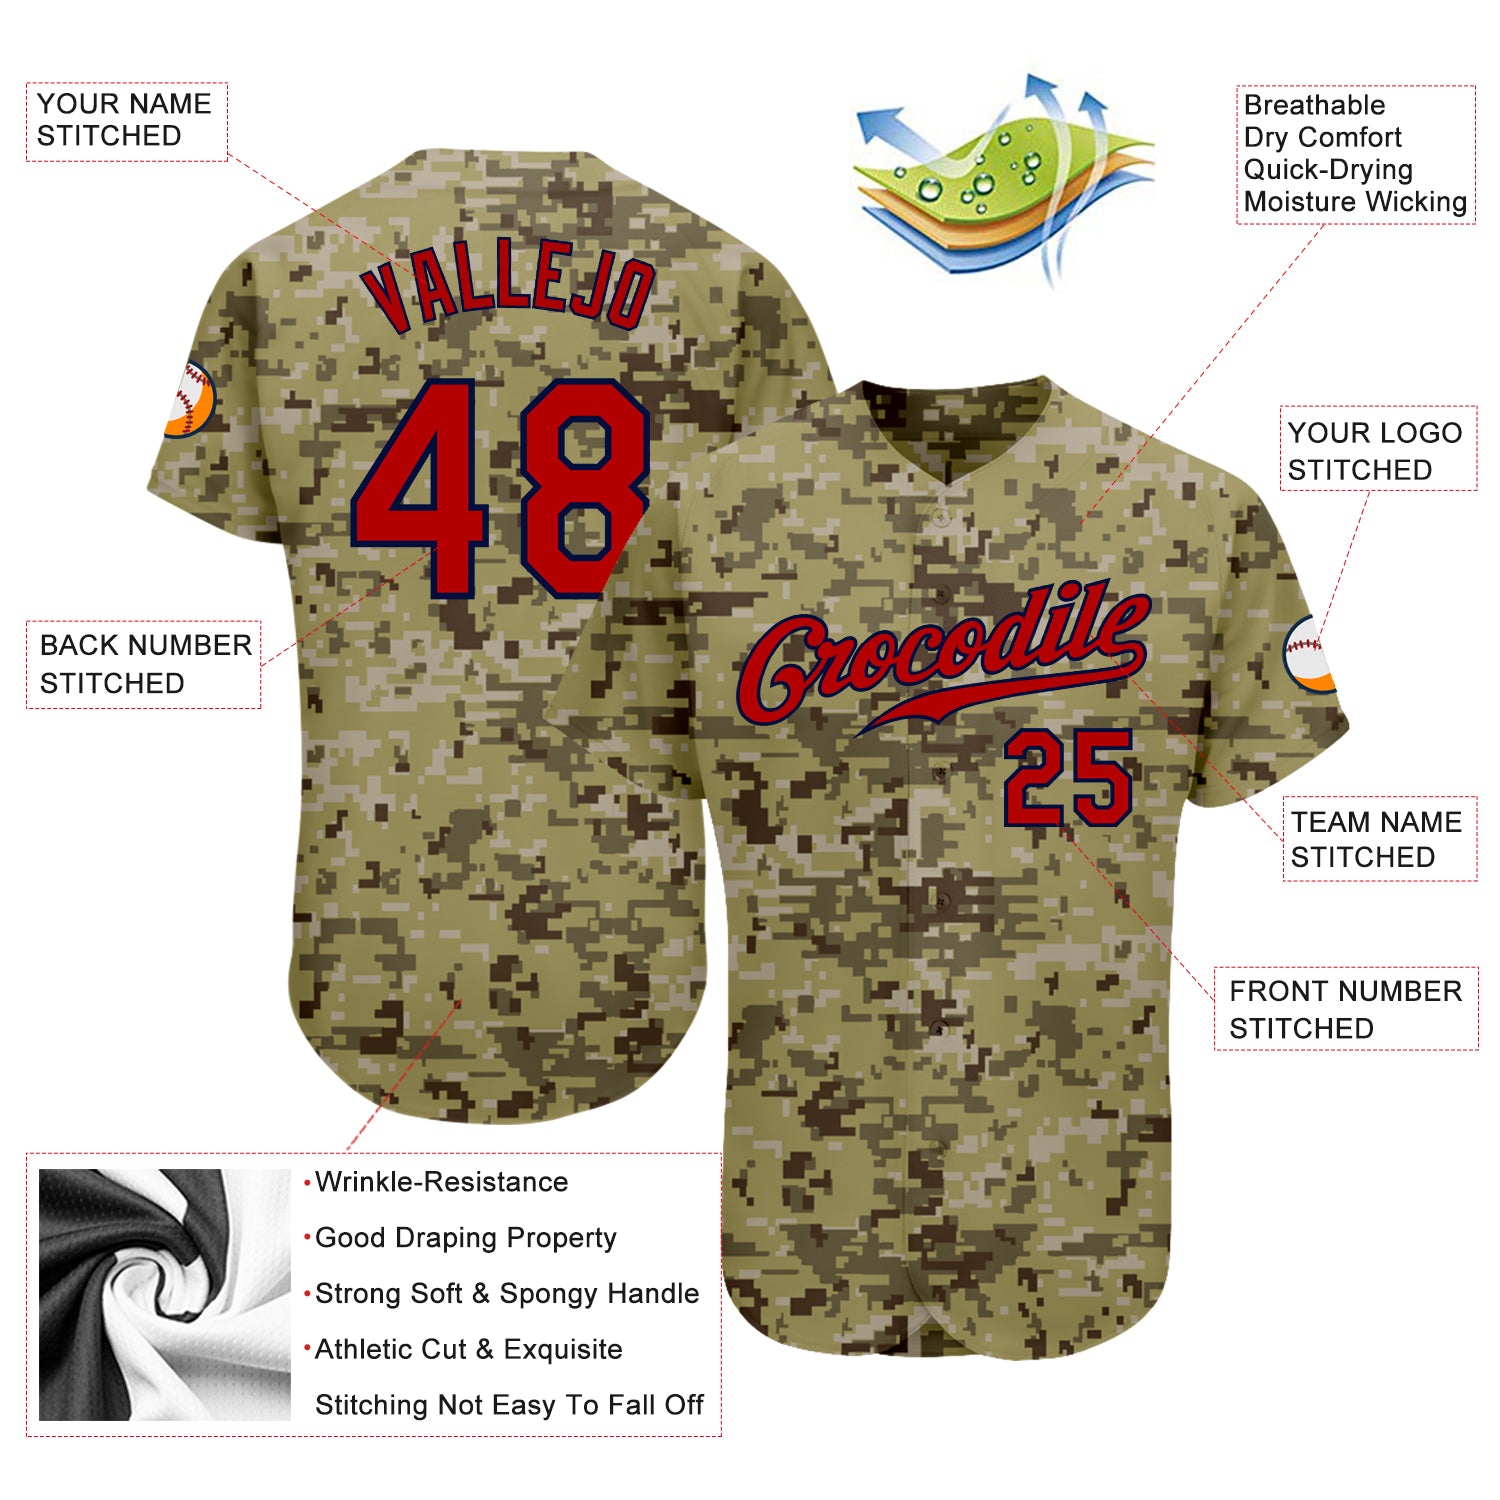 Tribute 2-Button Camo Trim Baseball Jersey Team name Tail Names and Numbers